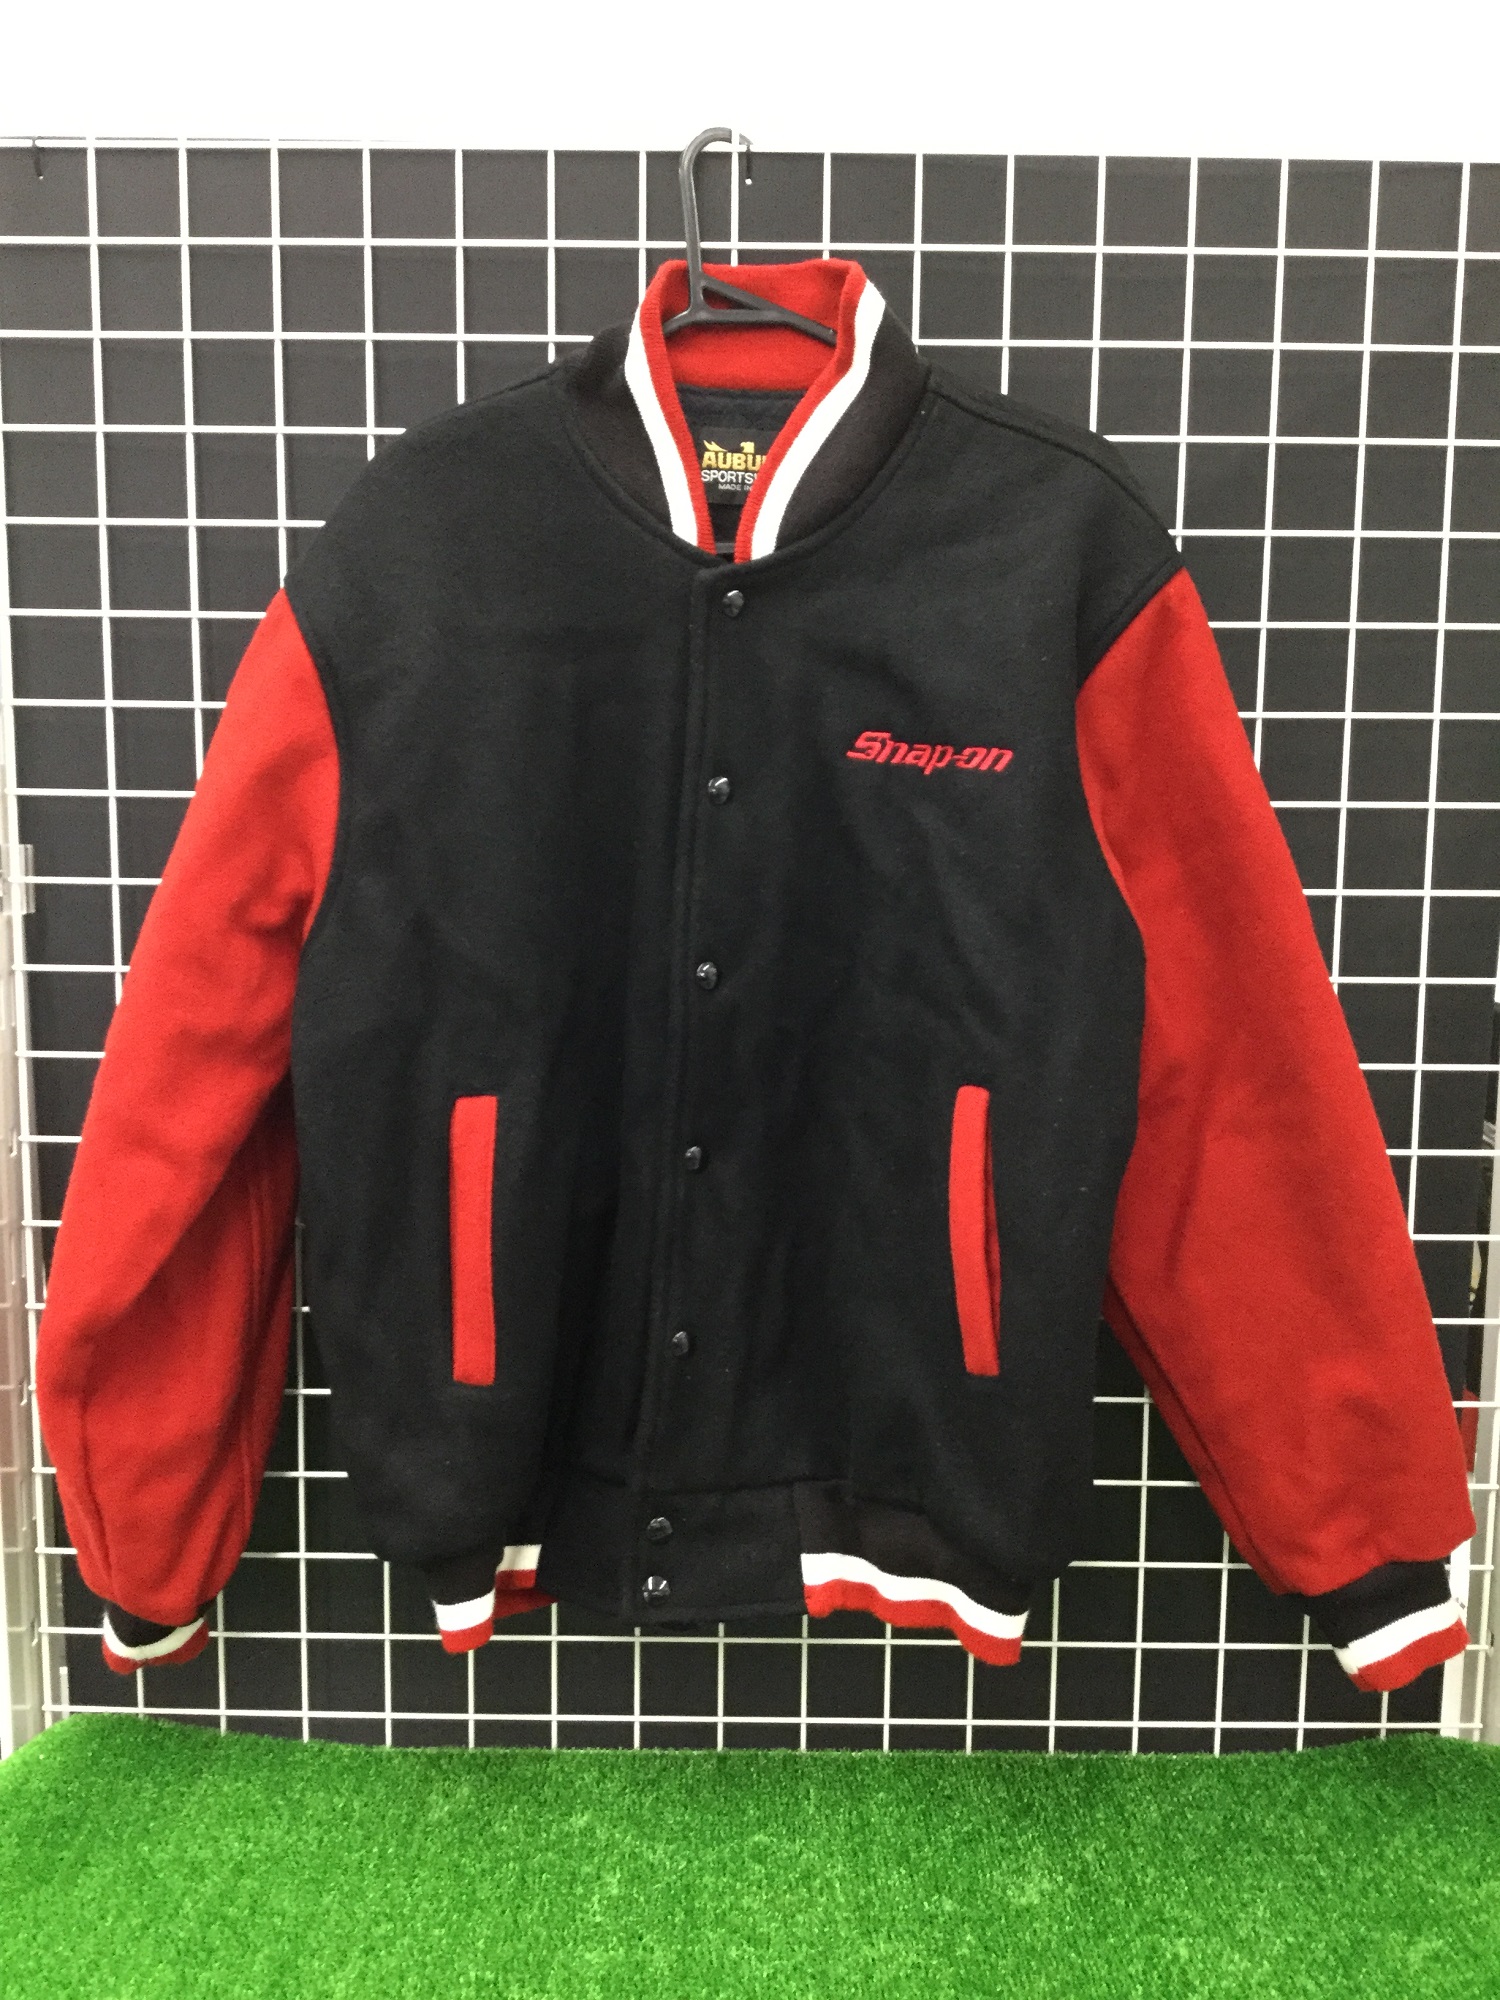 80s90s Snap-on スナップオン ウールスタジャン 黒 工具